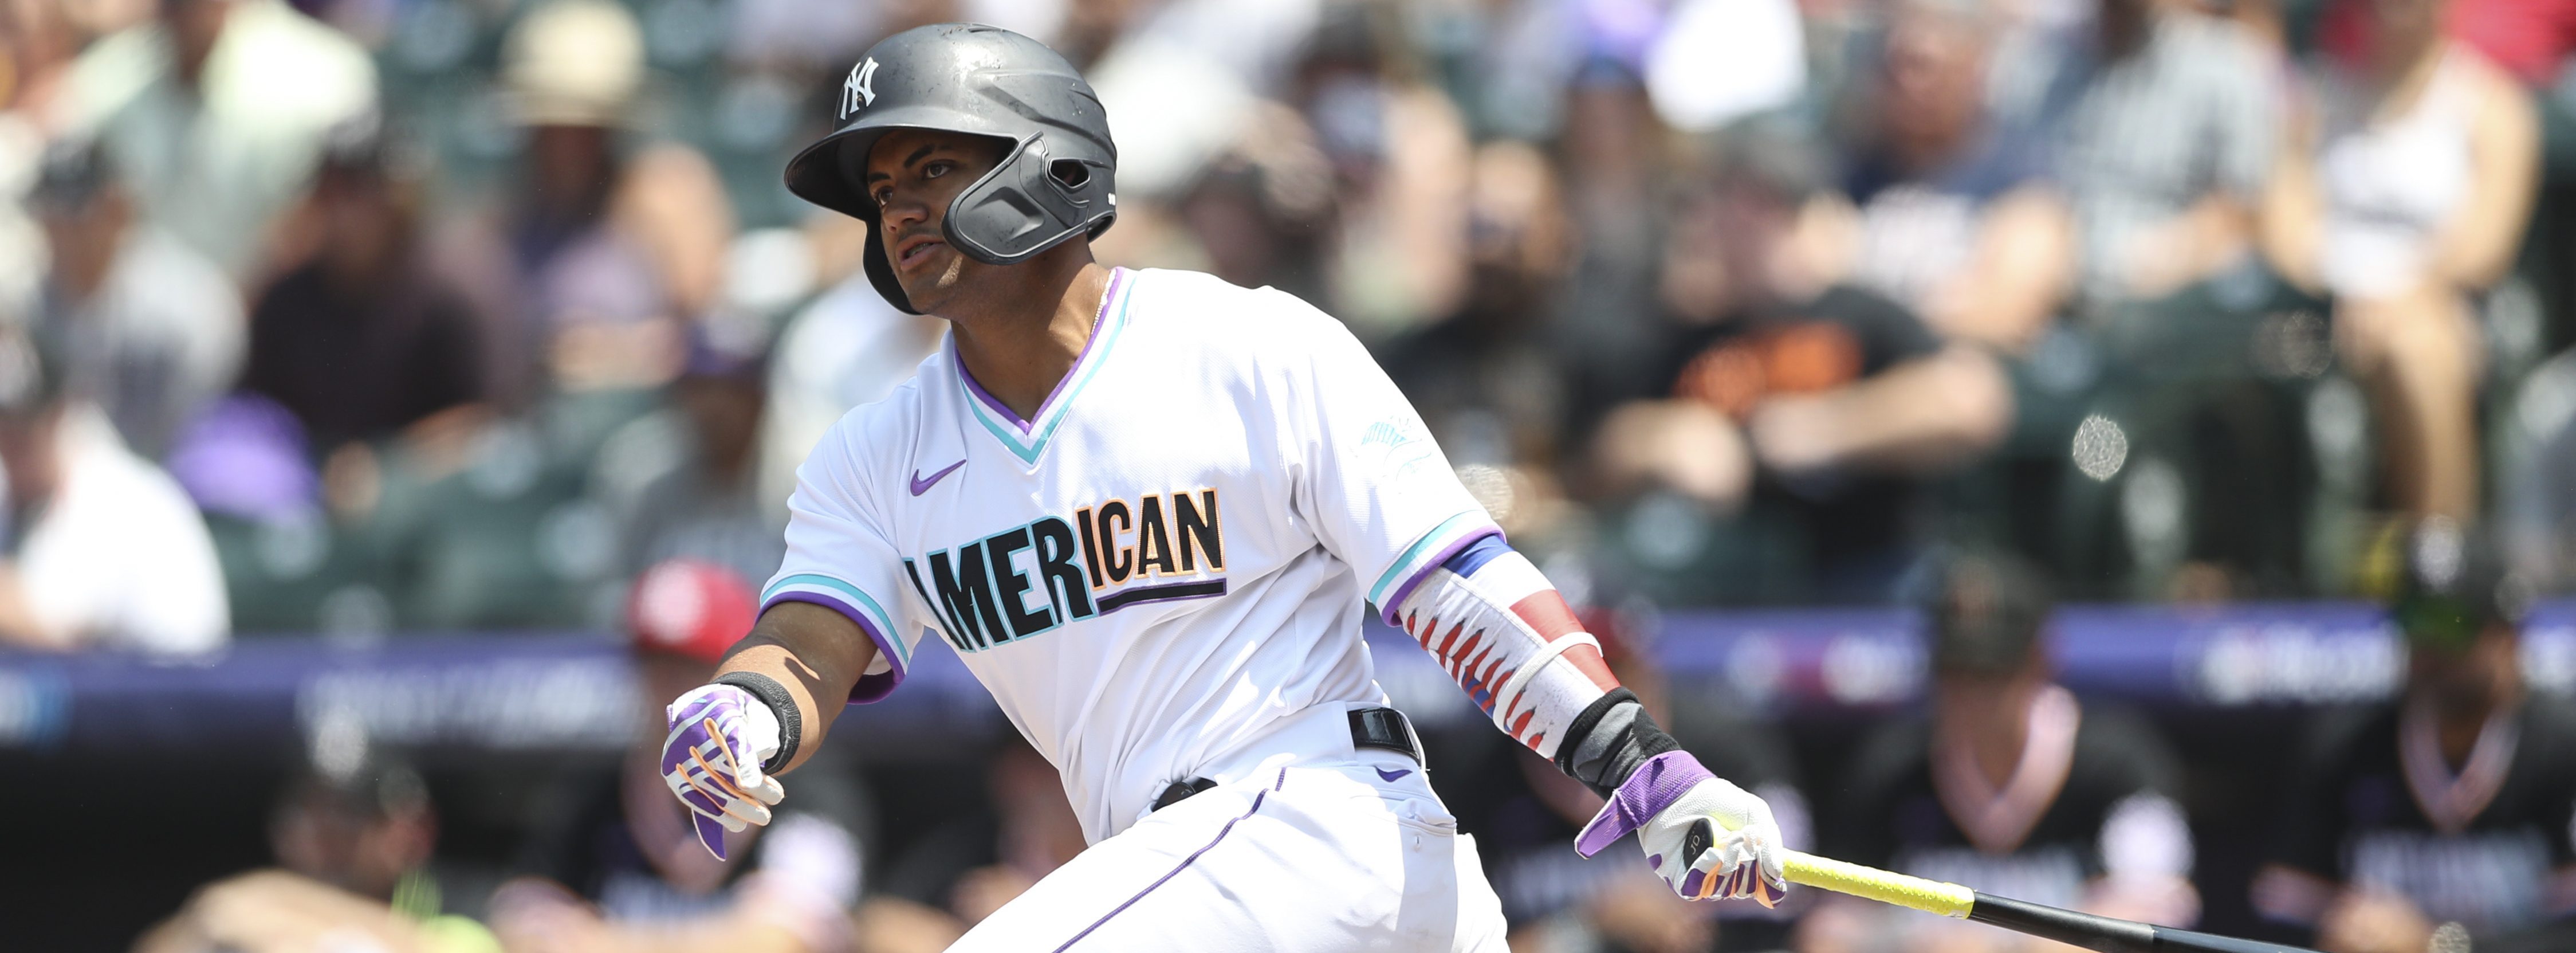 Yankees looking to 'exciting' shortstop prospect for 2023 